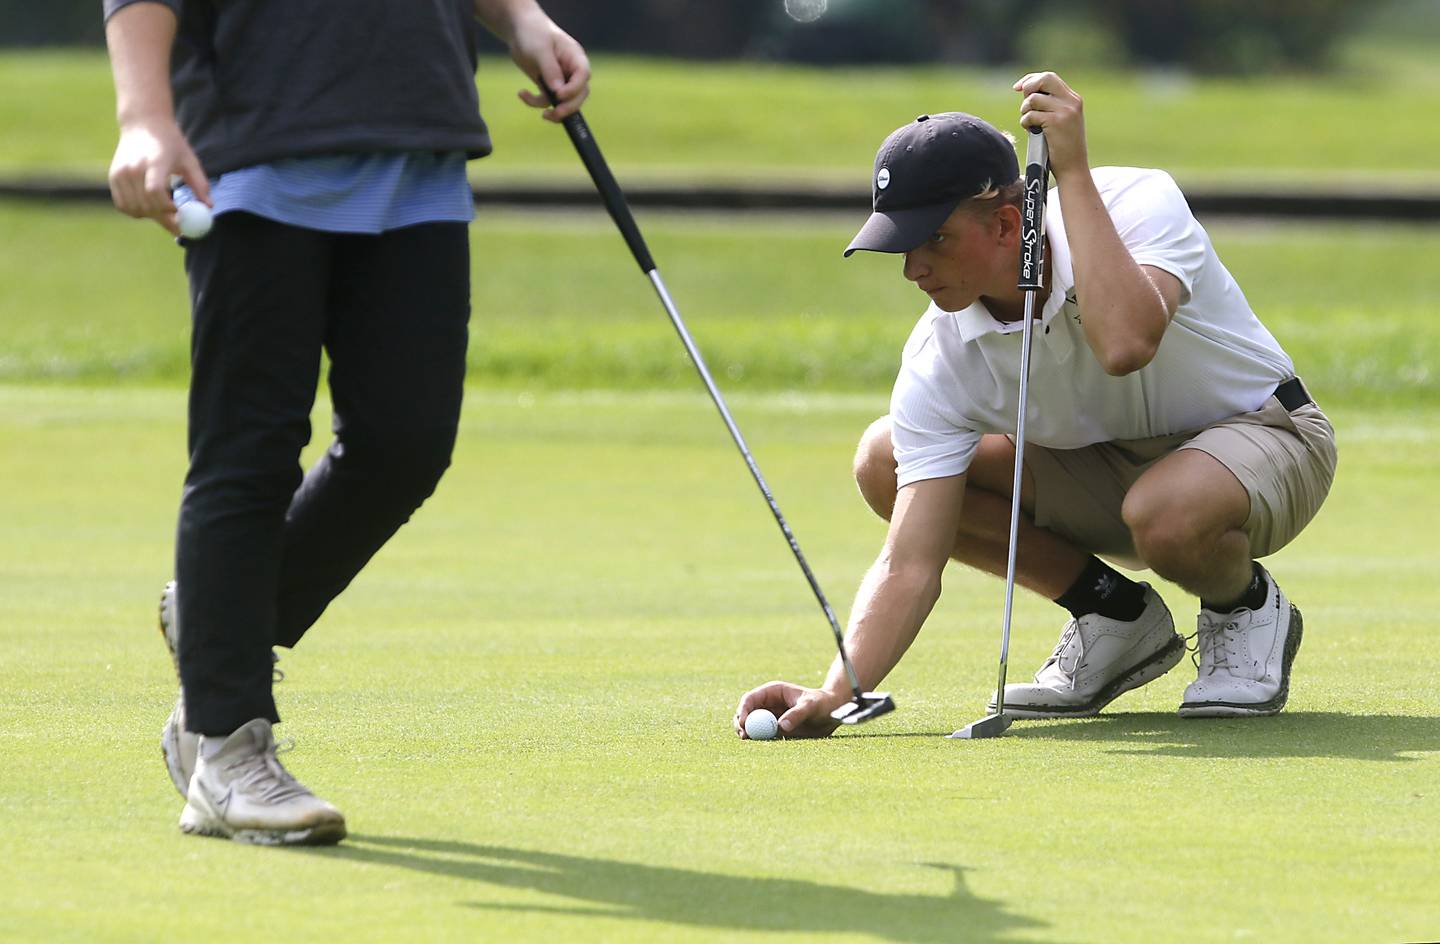 Prairie Ridge’s Charlie Pettrone lines up his putt on the seventh green during the Fox Valley Conference Boys Golf Tournament Thursday, Sept. 21, 2023, at McHenry Country Club in McHenry.